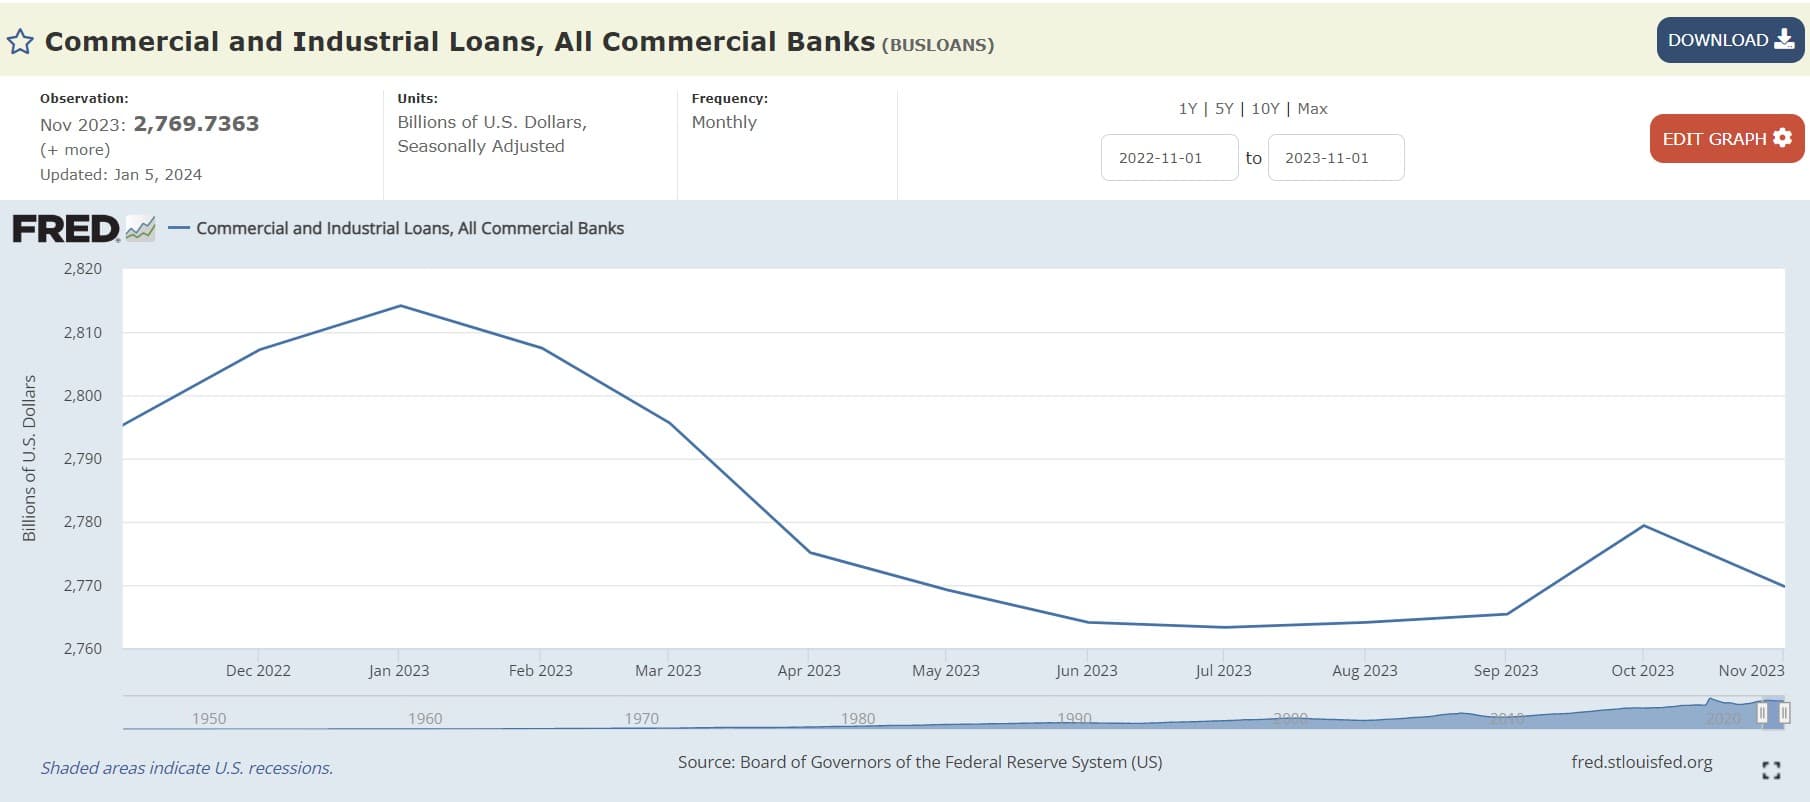 Commercial and Industrial Loans, All Commercial Banks